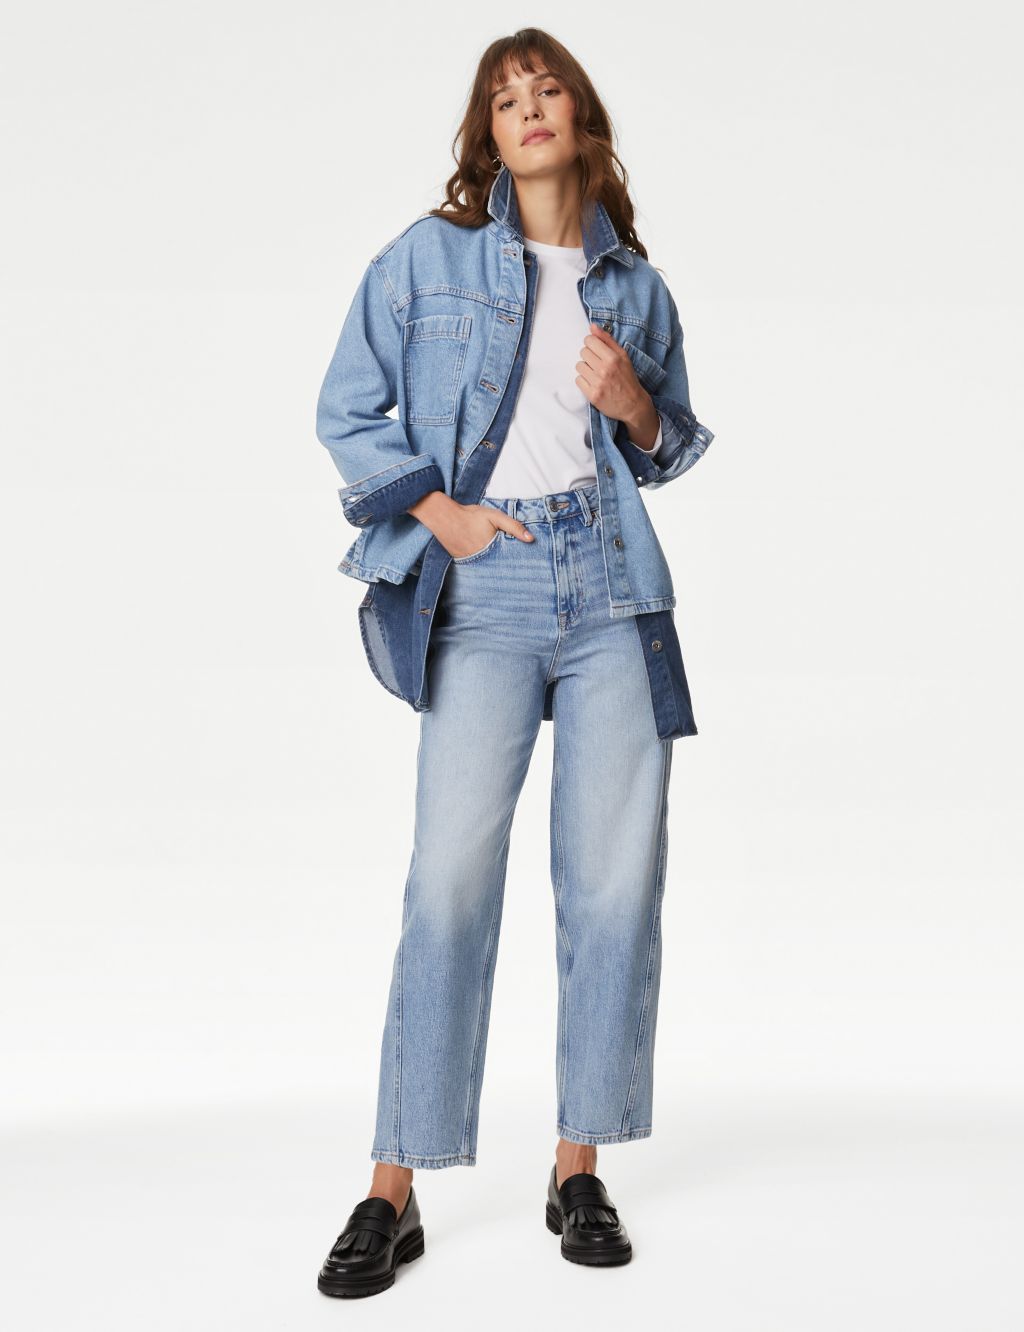 Page 2 - Women's Ankle Grazer Jeans | M&S